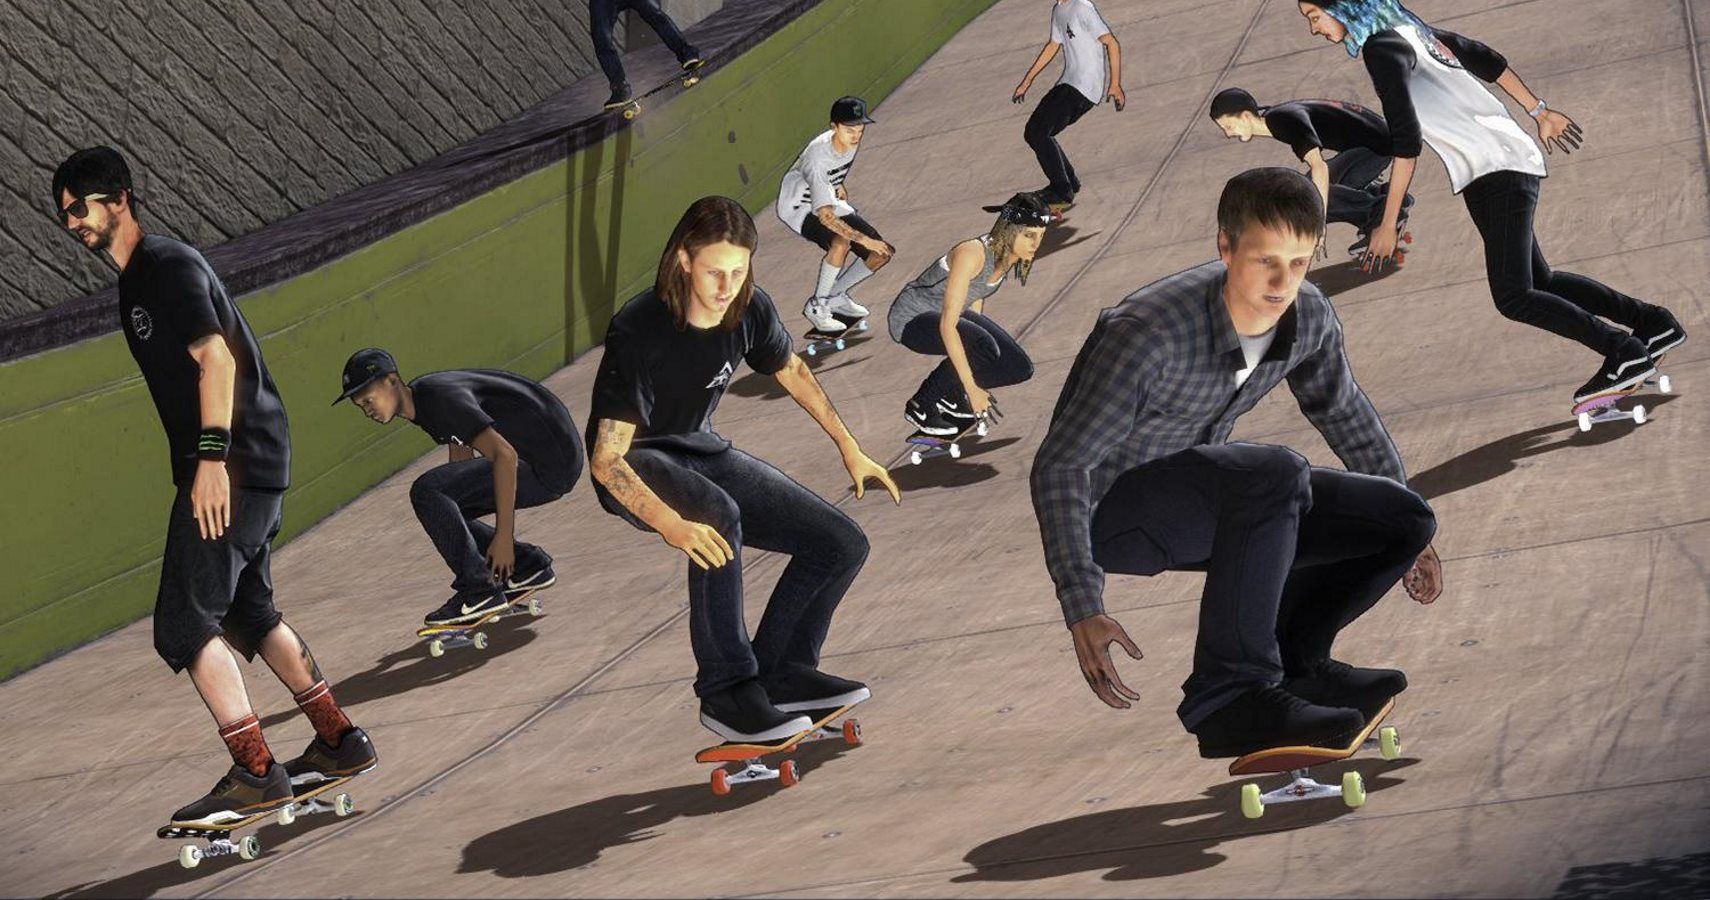 Tony Hawk No Longer Works With Activision (They Still Own The License)